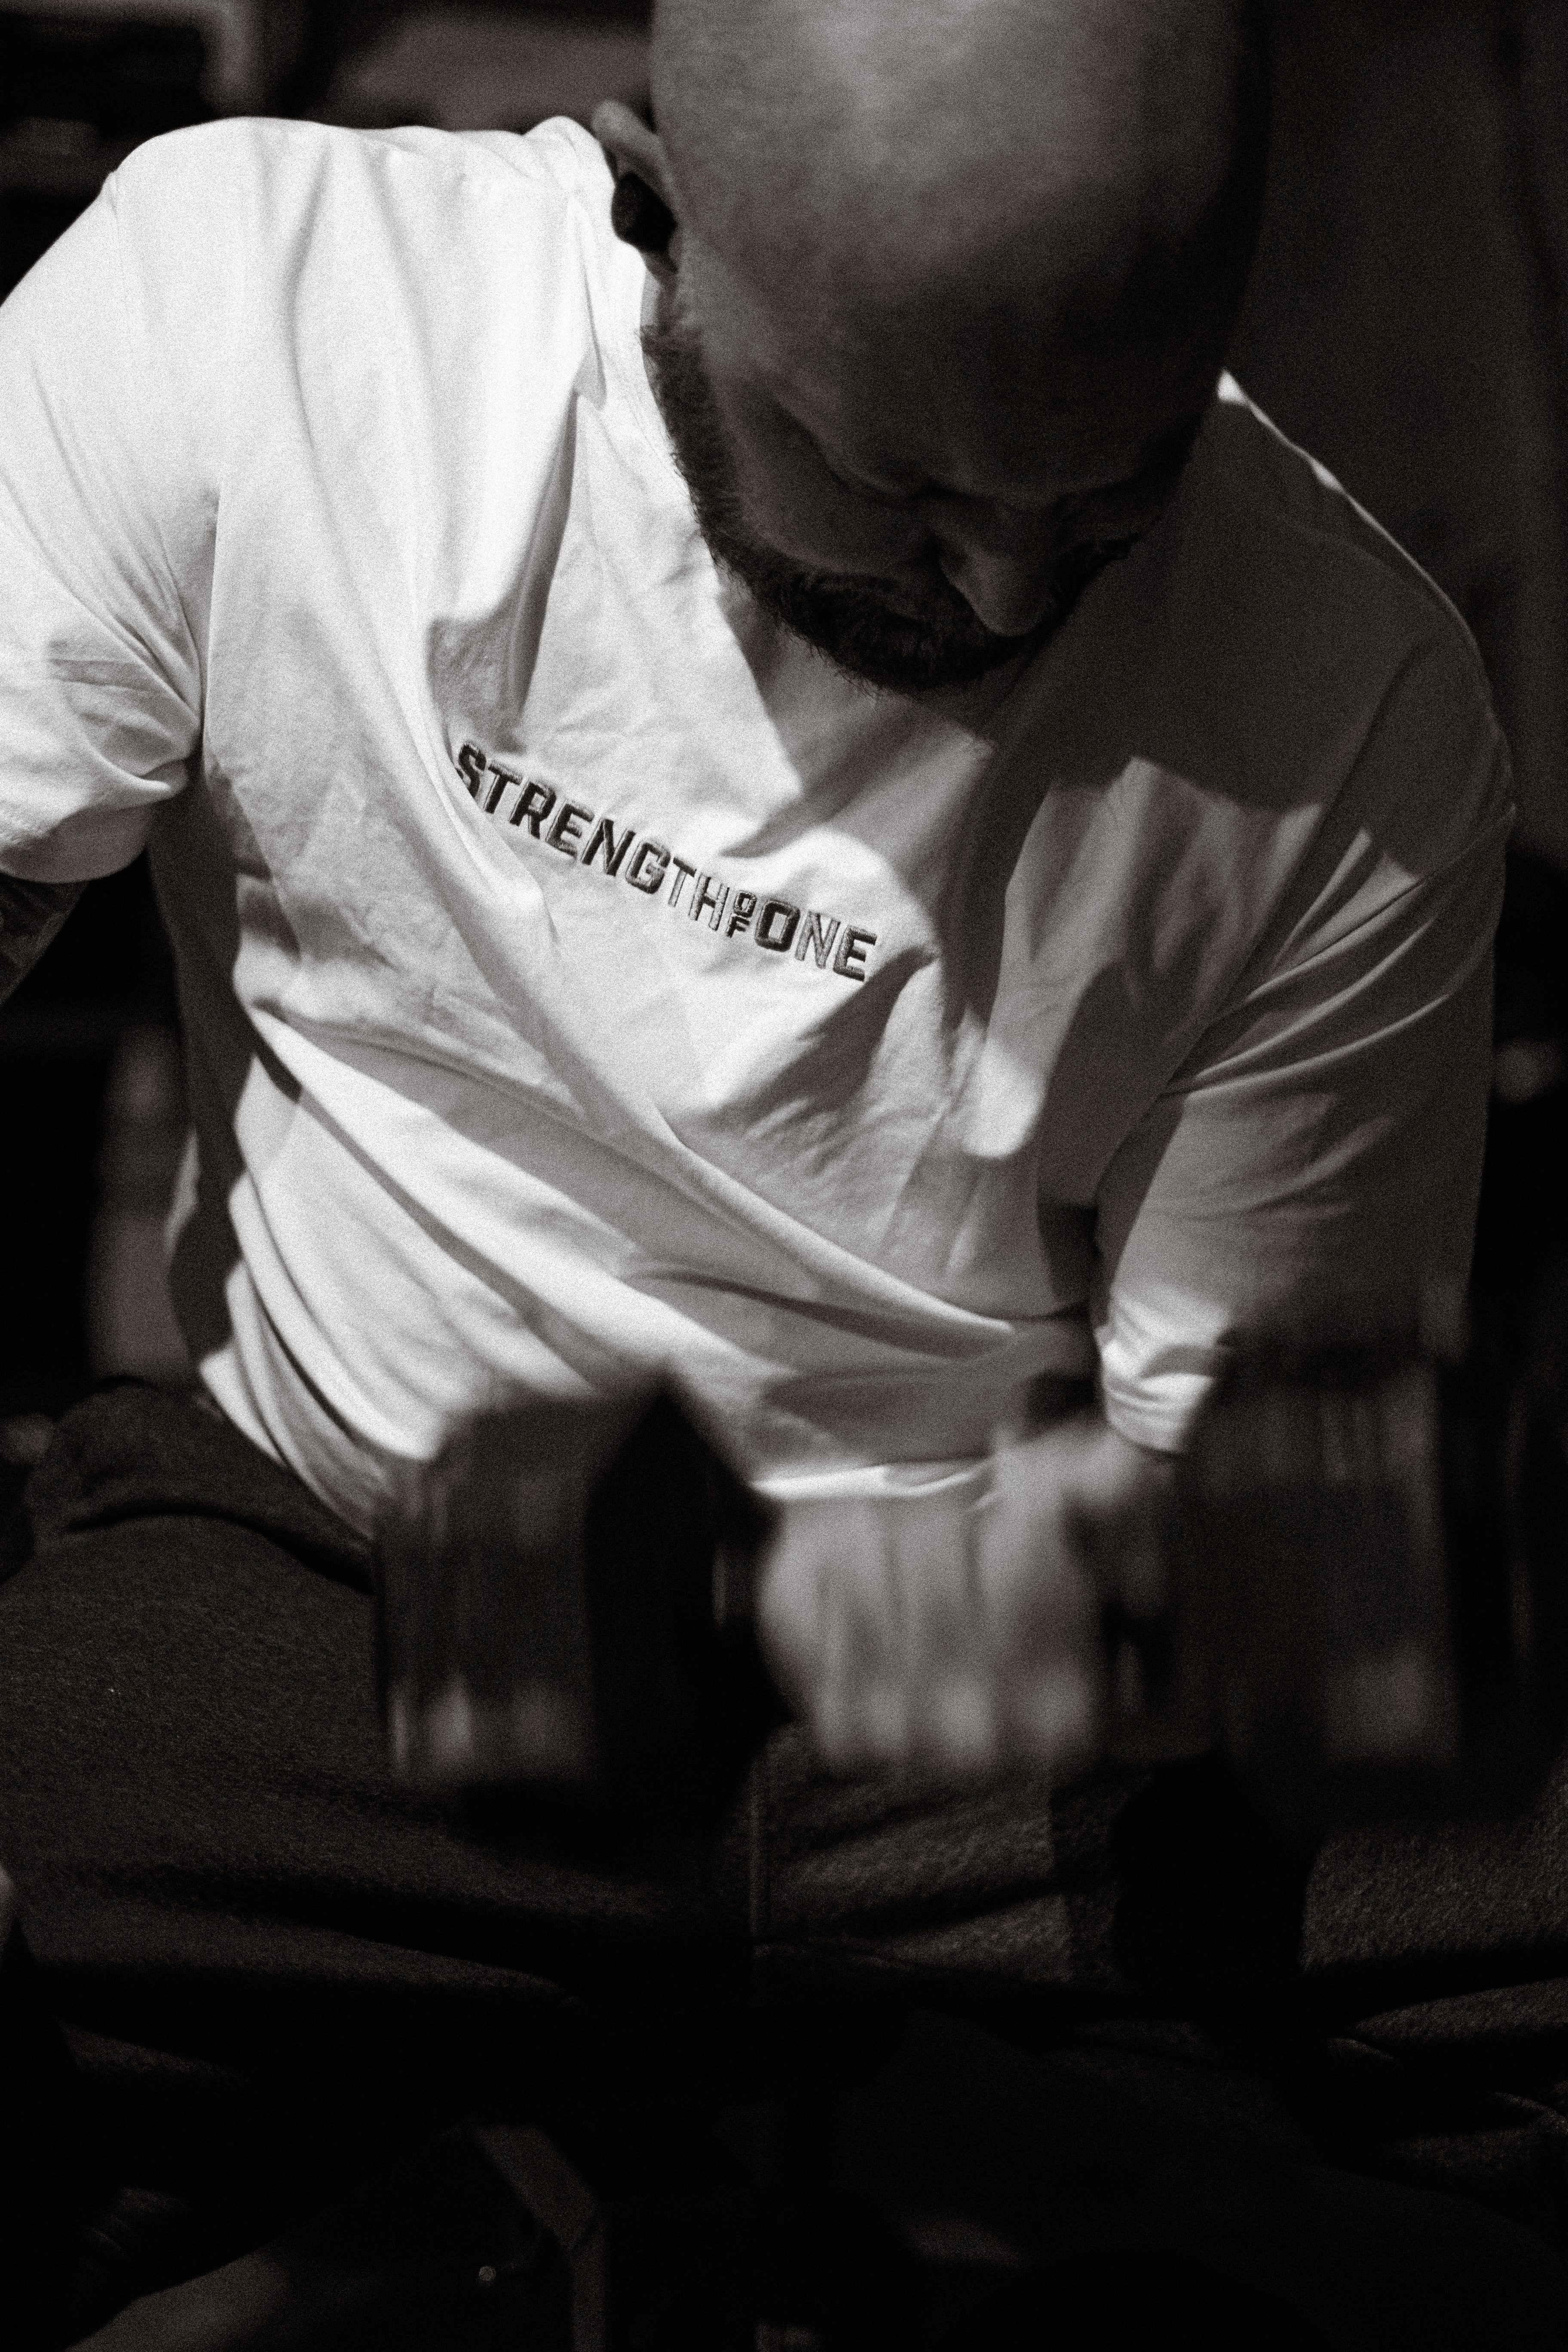 Man in a Strength of One white t-shirt lifting dumbbells in a gym setting.